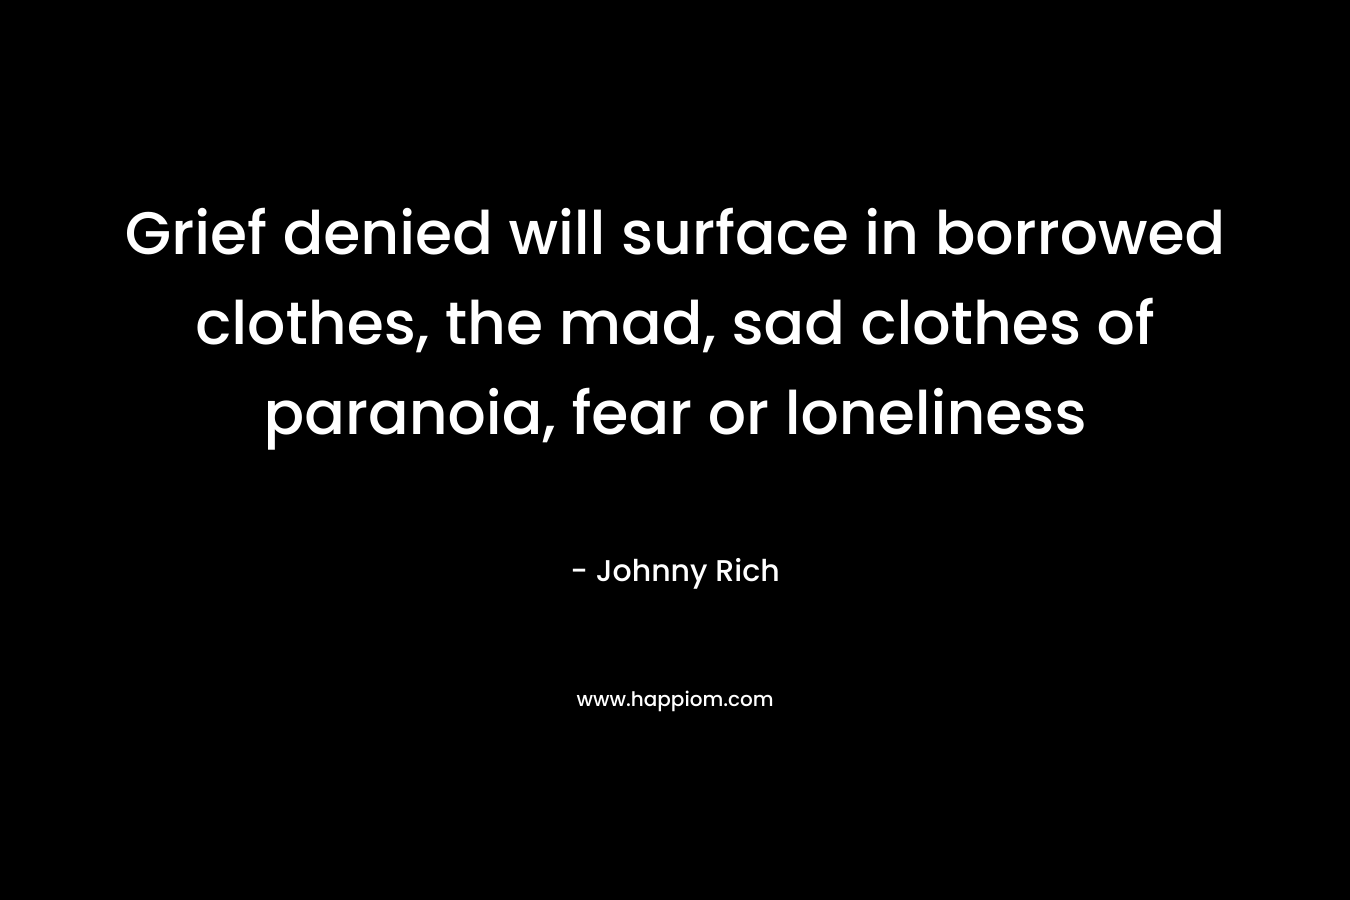 Grief denied will surface in borrowed clothes, the mad, sad clothes of paranoia, fear or loneliness – Johnny Rich